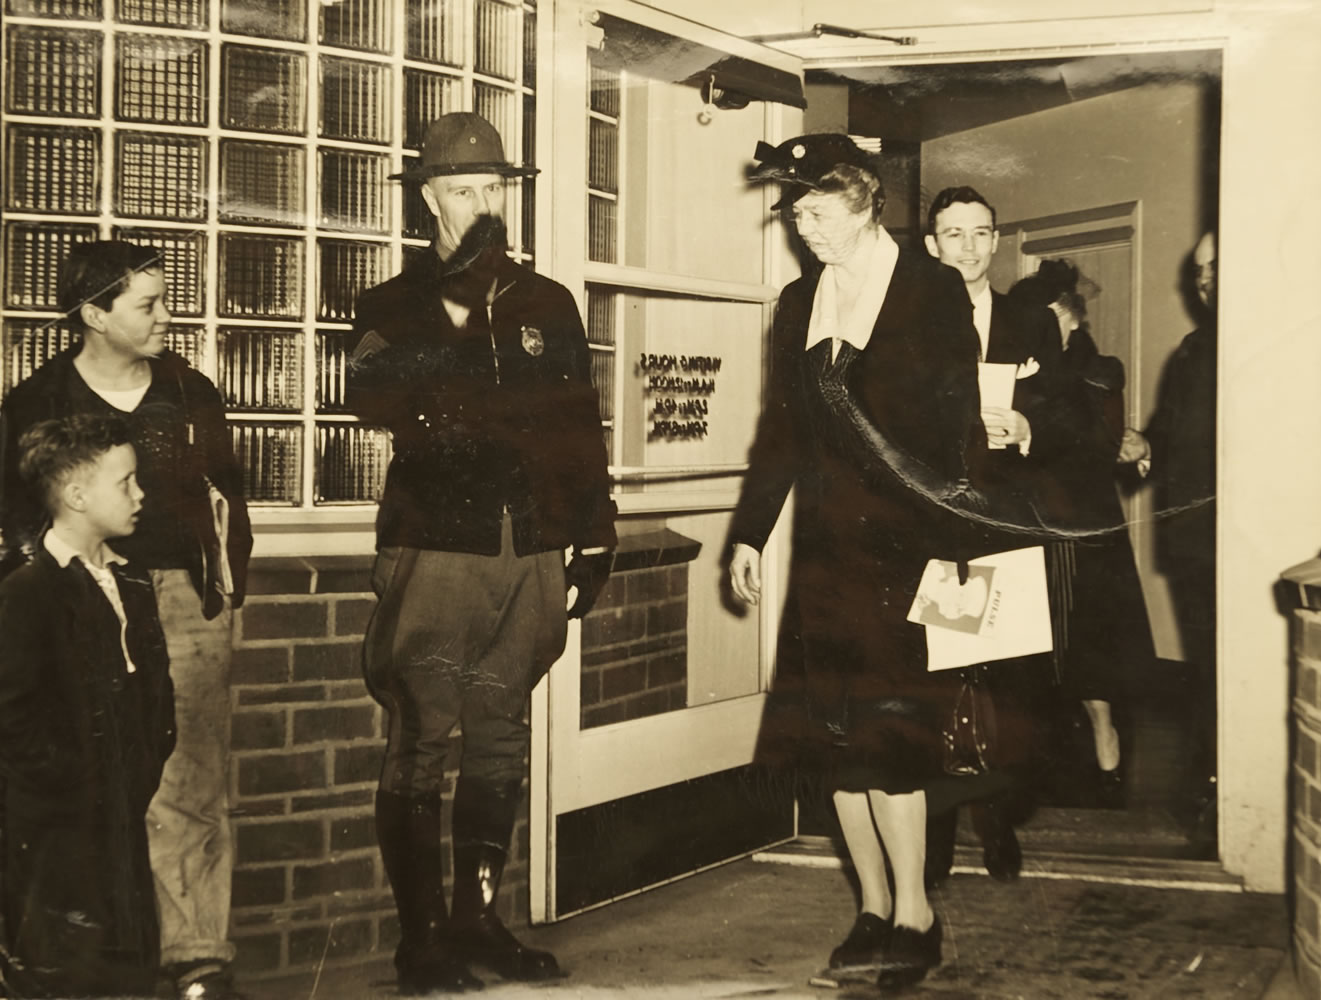 Mel Jackson, lower left, as an 8-year-old boy in 1943 greeting first lady Eleanor Roosevelt as she is escorted from the shipyard hospital.